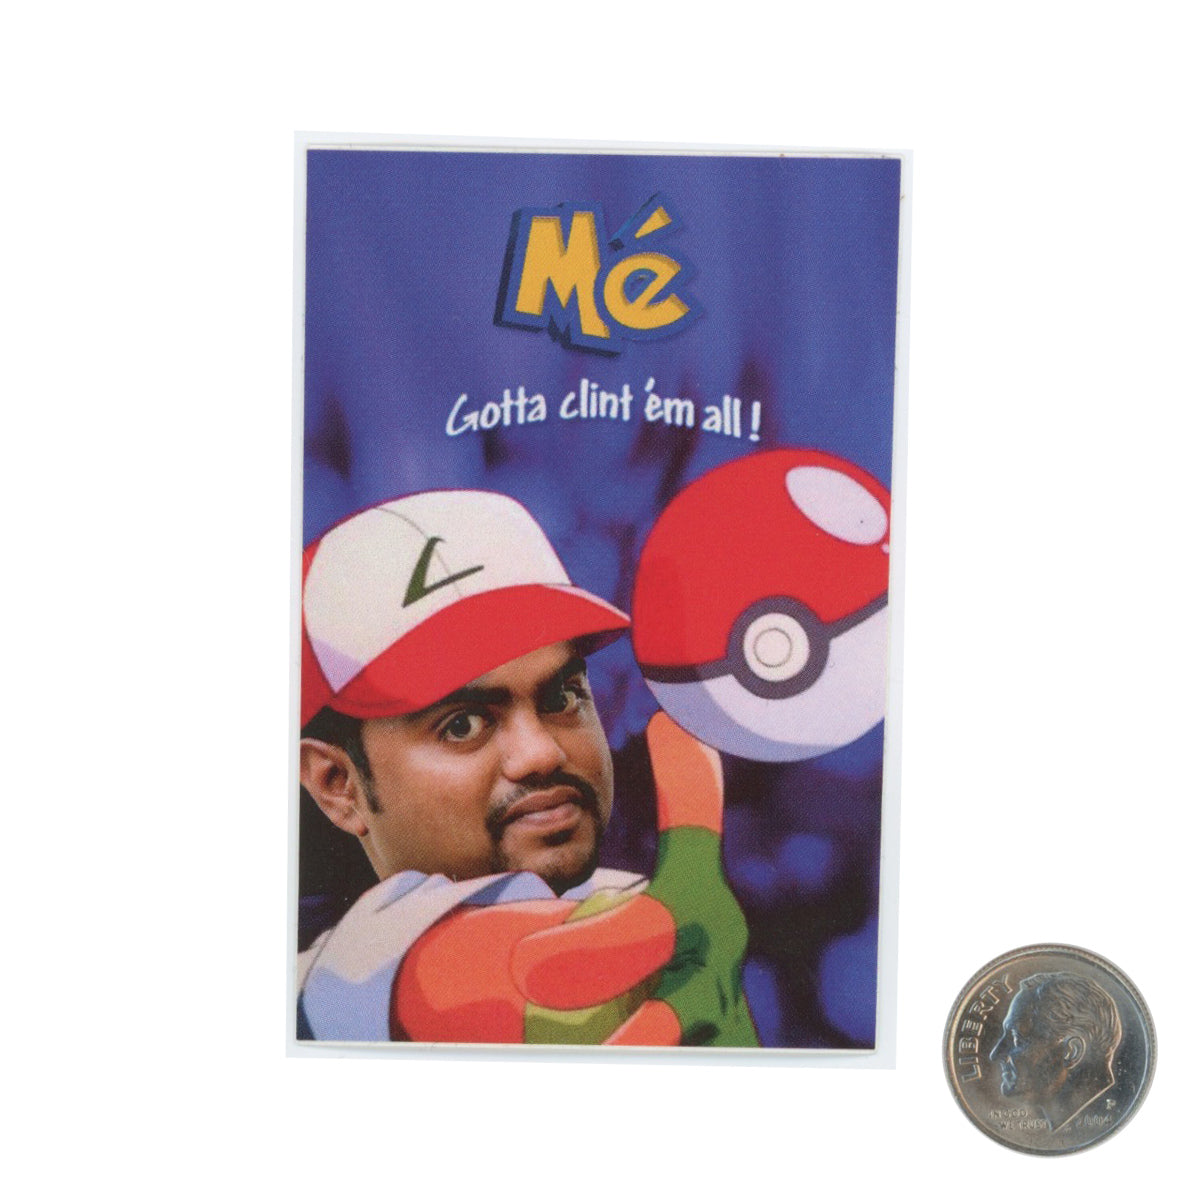 Clint Mario and ME POKEMON Ball Sticker with dime